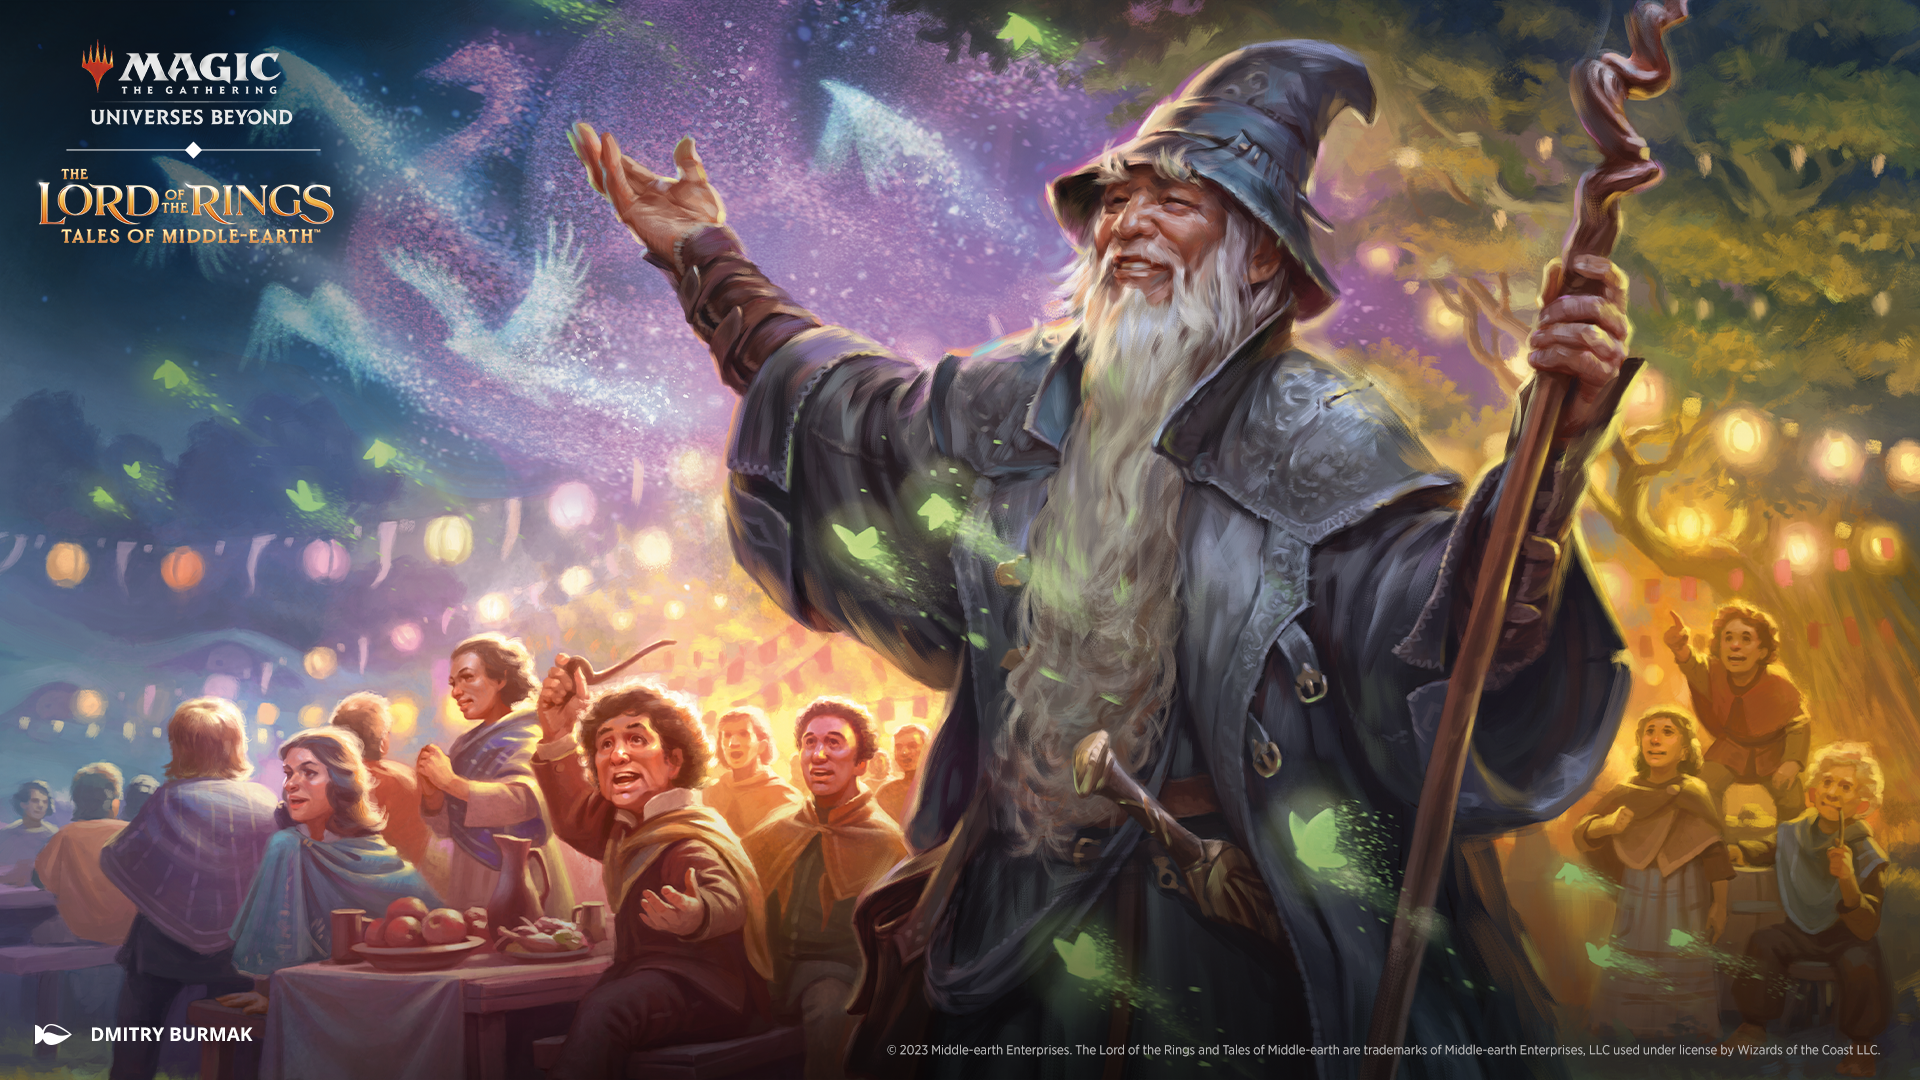 Schedule Your Store Championship for The Lord of the Rings: Tales of  Middle-earth™